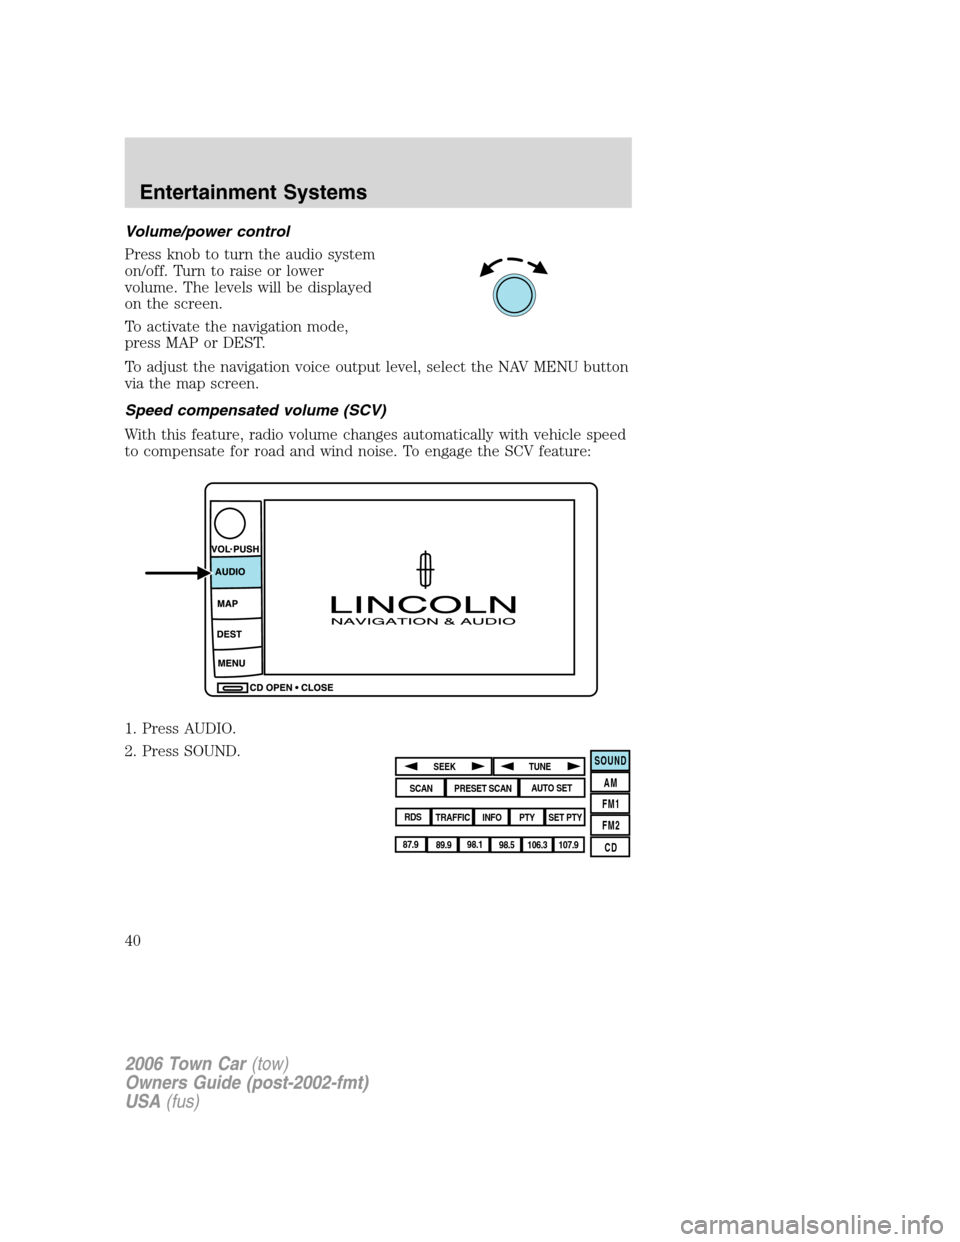 LINCOLN TOWN CAR 2006 Owners Guide Volume/power control
Press knob to turn the audio system
on/off. Turn to raise or lower
volume. The levels will be displayed
on the screen.
To activate the navigation mode,
press MAP or DEST.
To adjus